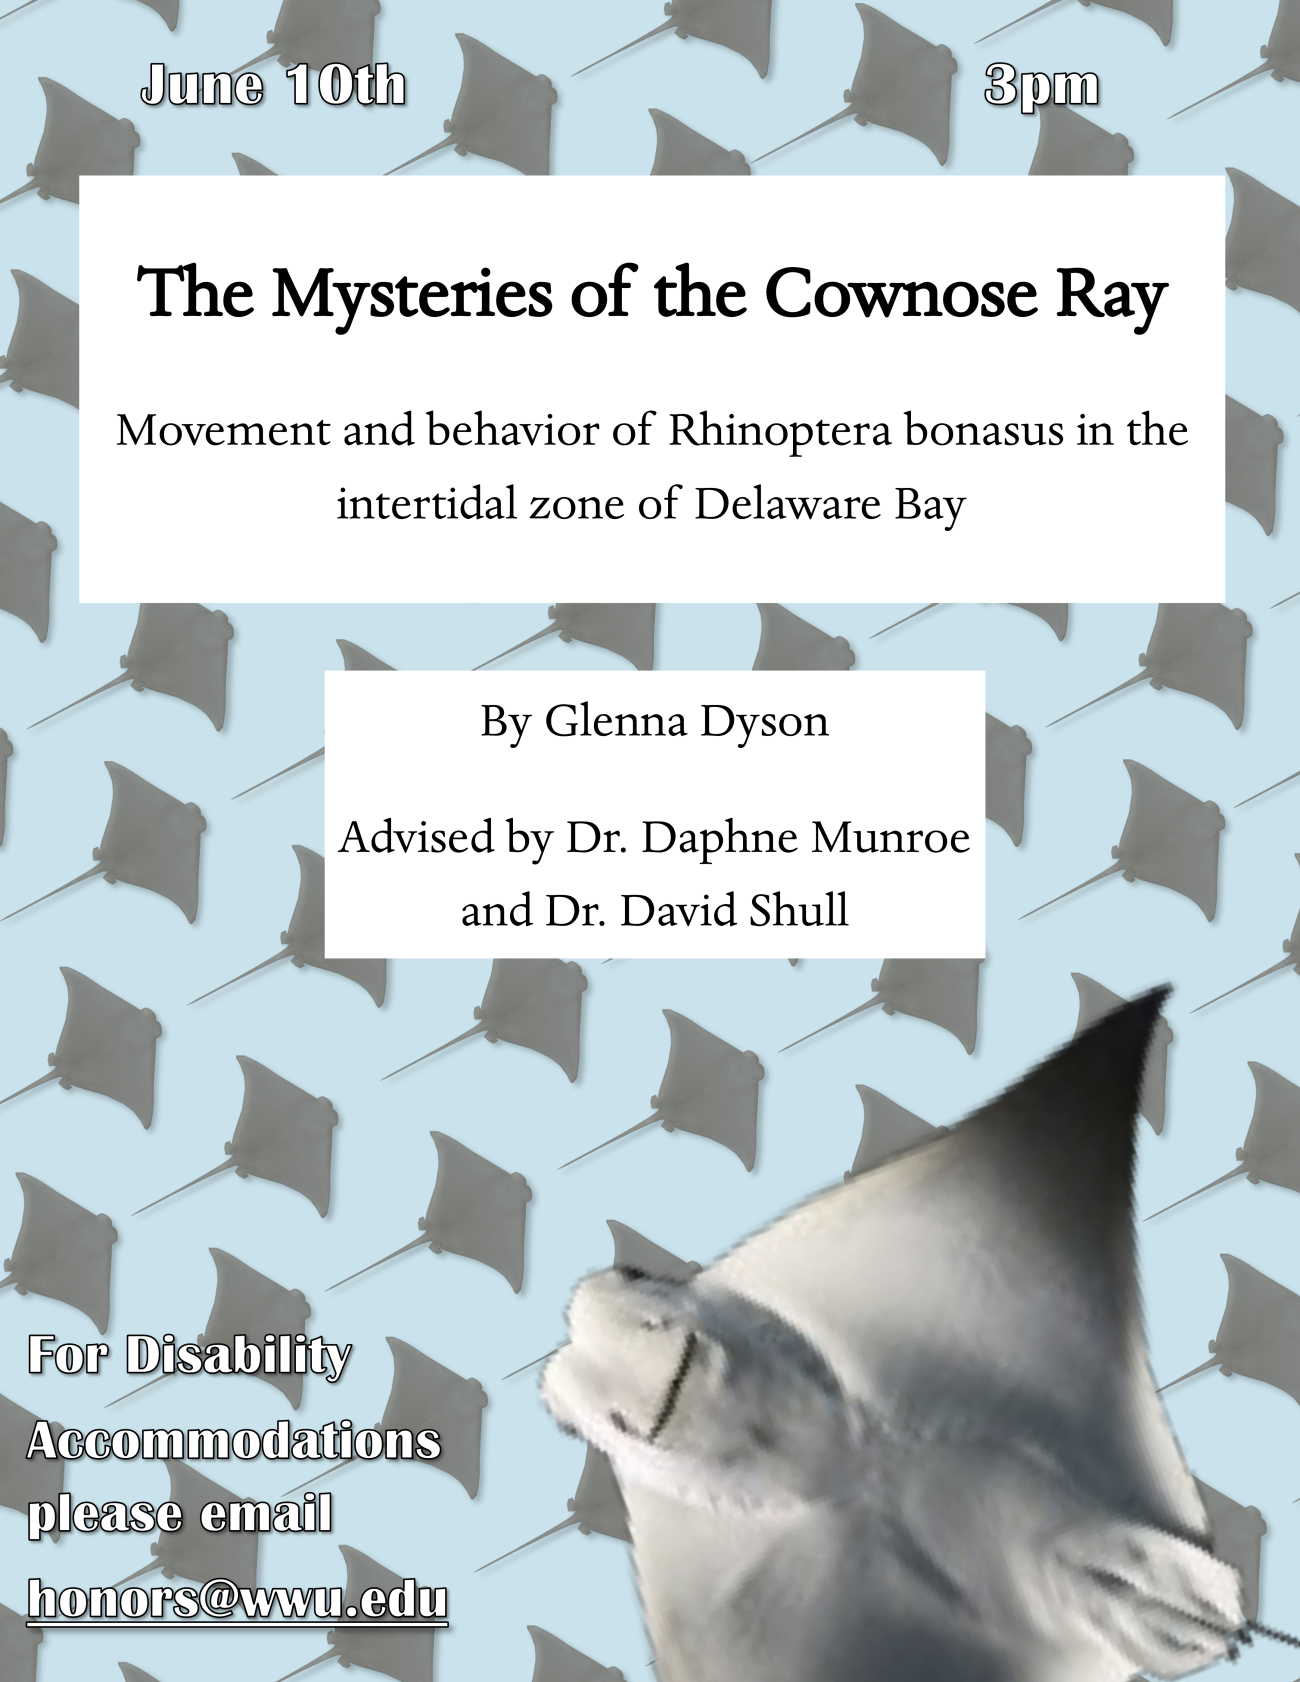 “School of cownose rays swim in the background, with an up close face of a ray in the bottom right-hand corner. Text reads "The Mysteries of the Cownose Ray: Movement and behavior of Rhinoptera bonasus in the intertidal zone of Delaware Bay."  "Honors Capstone Presentation by Glenna Dyson, Advisor Dr. Daphne Munroe and Dr. David Sull"  "June 10, 2020, 3:00 PM”  "For disability accommodations please email honors@wwu.edu"